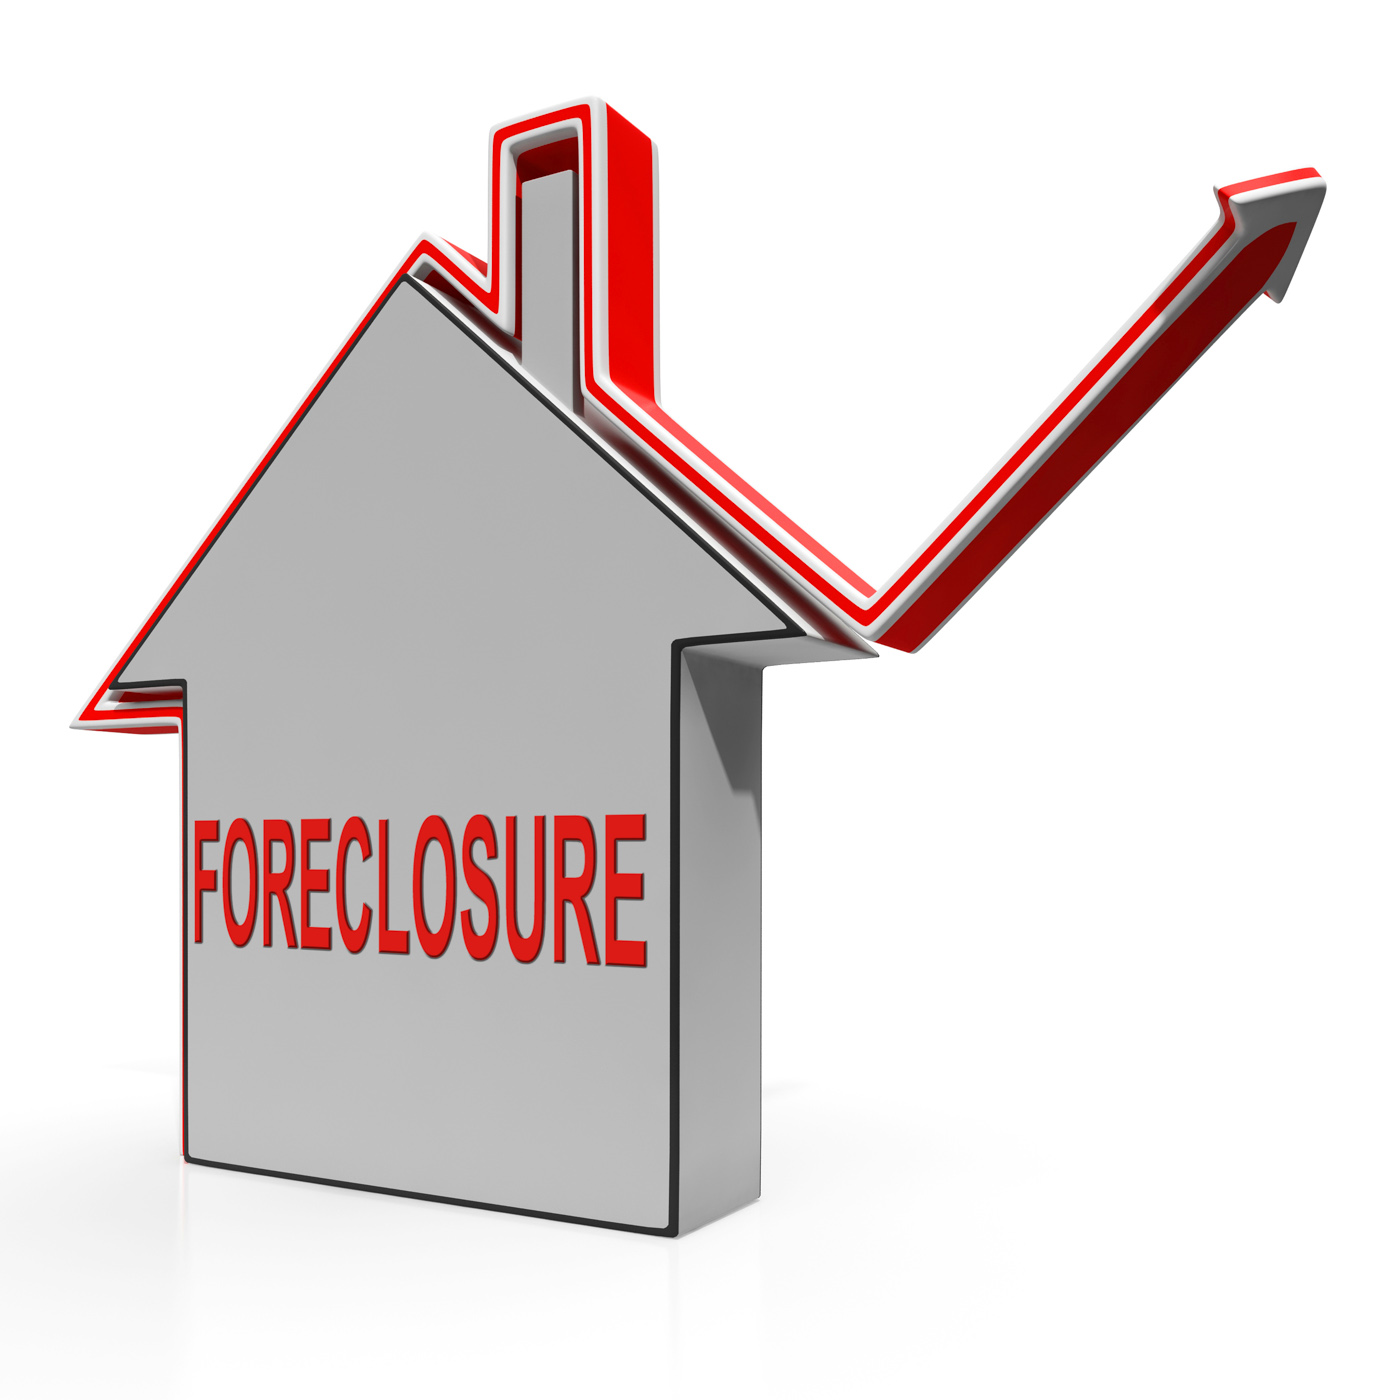 Foreclosure house shows lender repossessing and selling photo